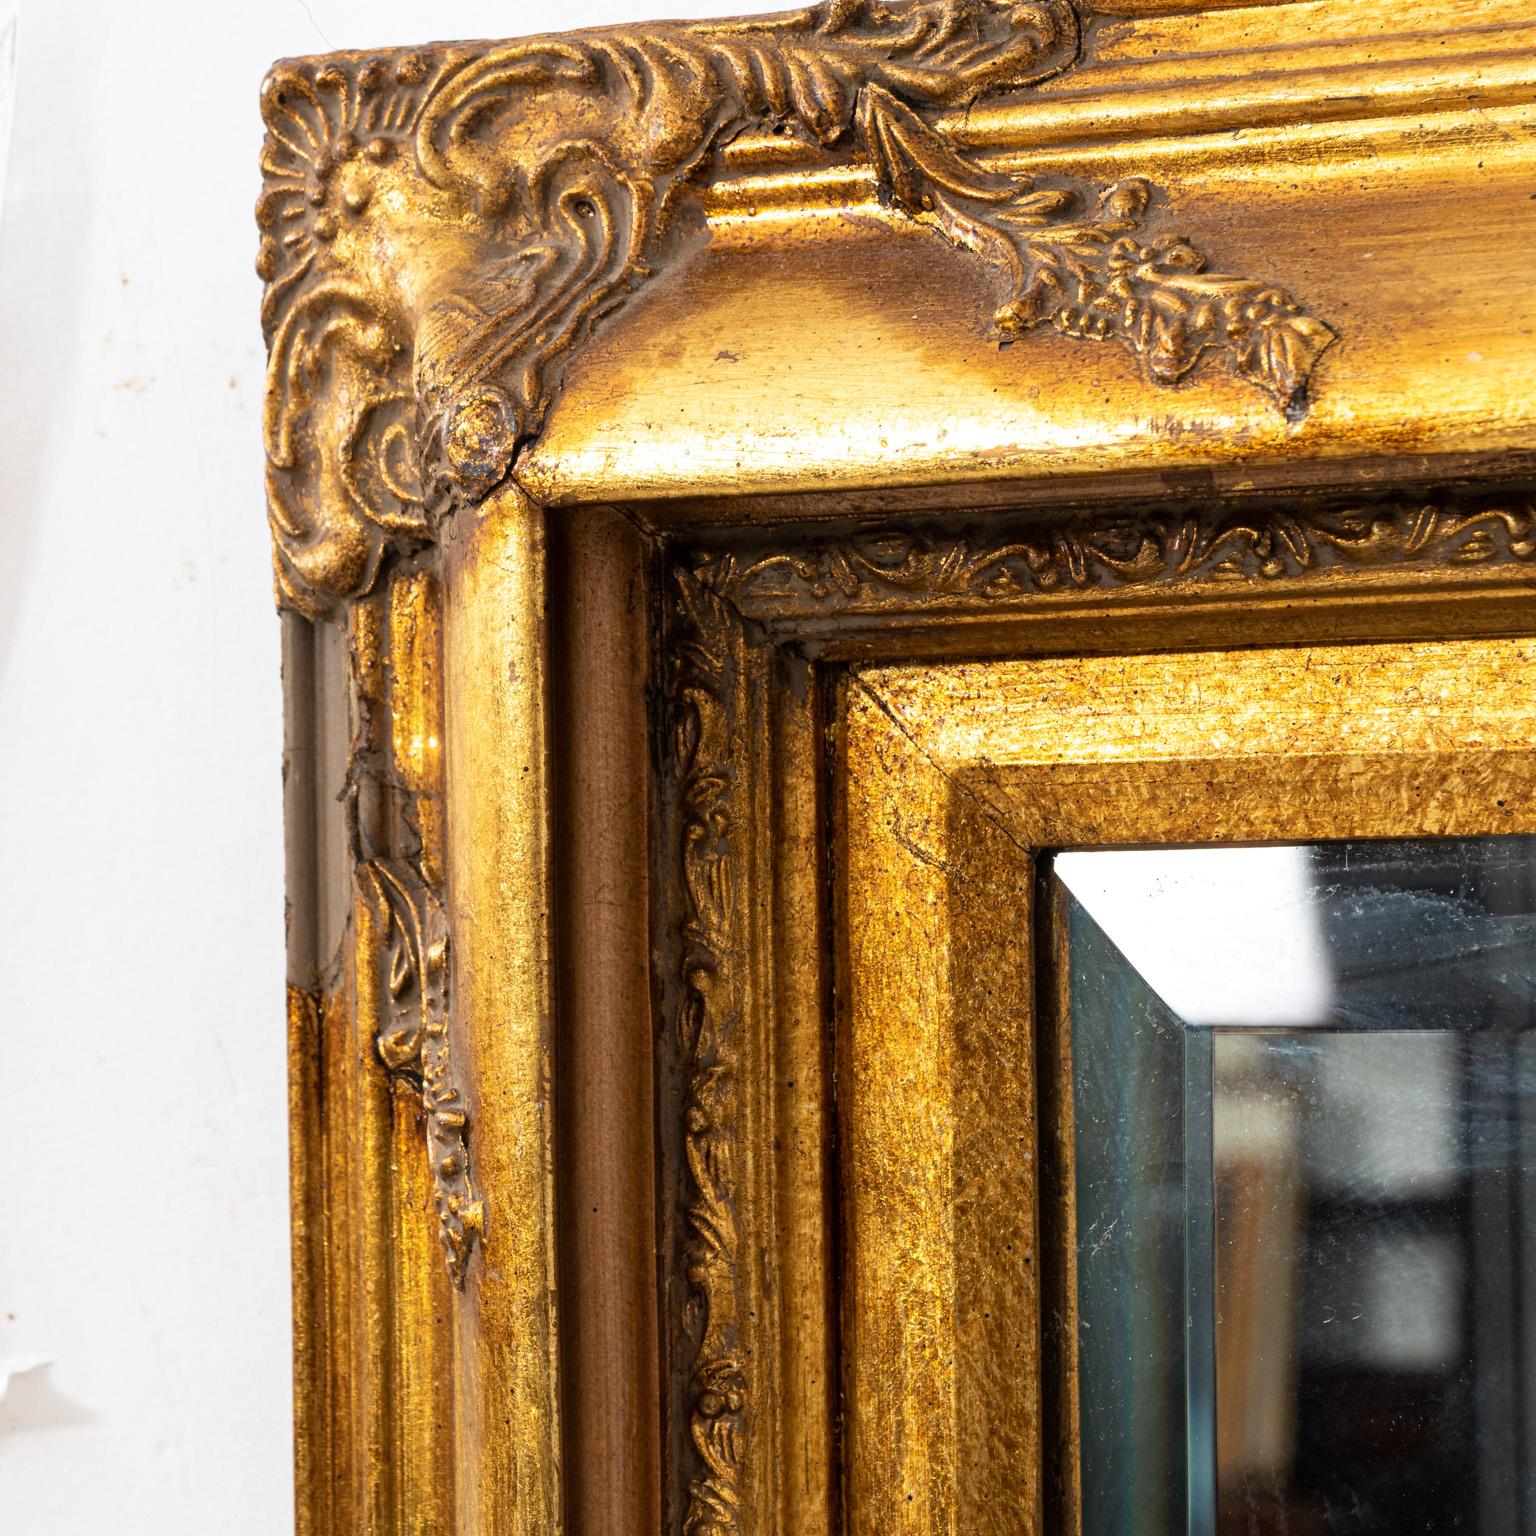 Small gilt Italian mirror with beveled edge, please note of wear consistent with age.